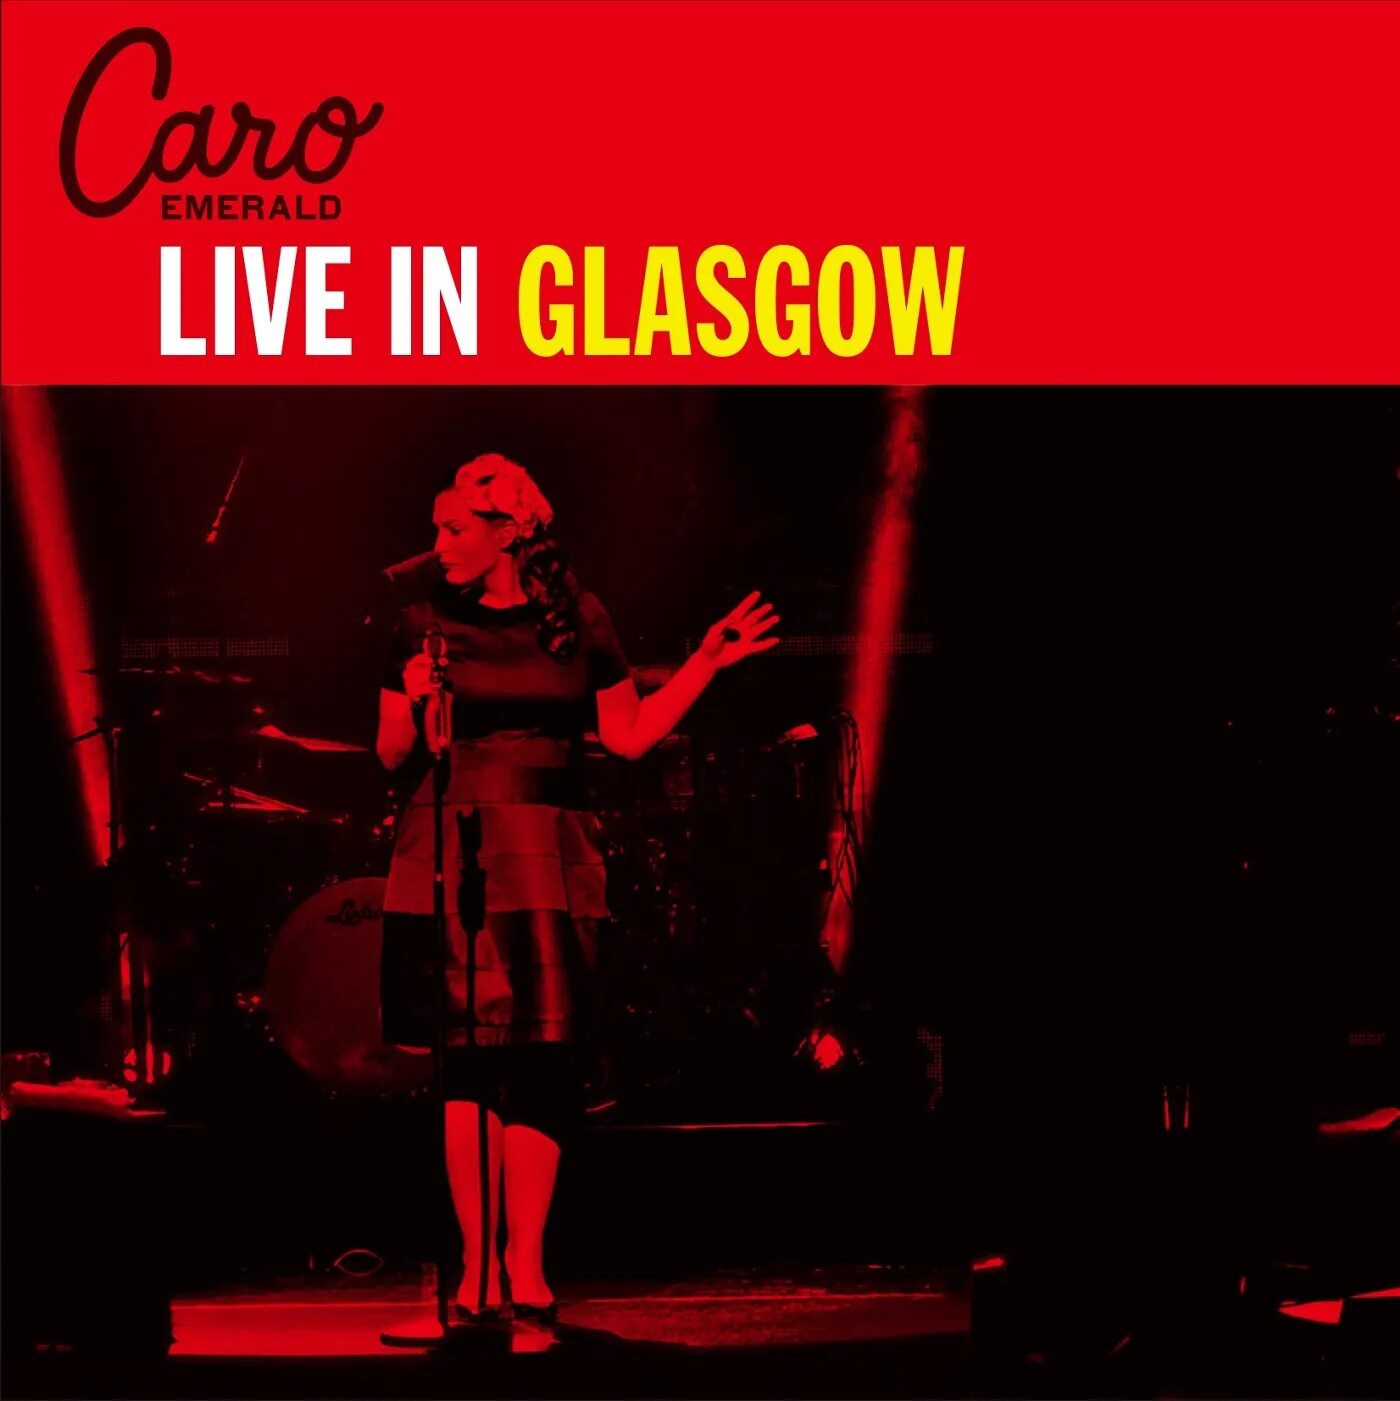 Emerald lives. Caro Emerald CD. Caro Emerald - deleted Scenes from the Cutting Room Floor. Caro Emerald - i belong to you. Обложка на CD Caro Emerald все альбомы.